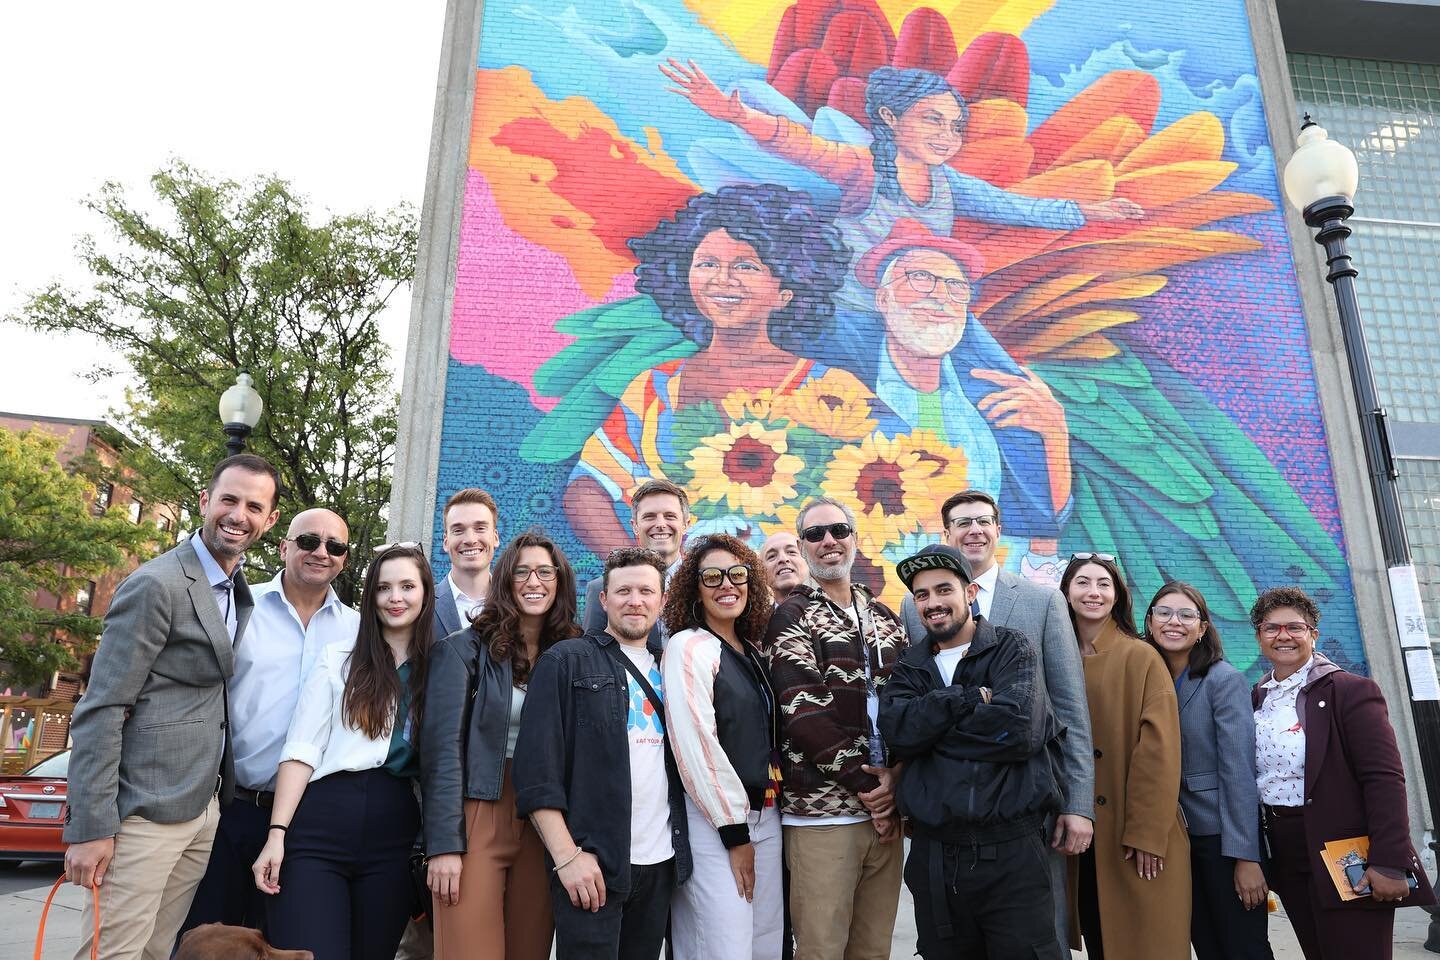 So proud to be part of the #beautifymainstreets initiative! Today we unveiled a vibrant and powerful new landmark in the heart of East Boston: &ldquo;Generational Spirit&rdquo; by Eastie-based artists @silvialopezchavez and @felipeortizart 

This mur